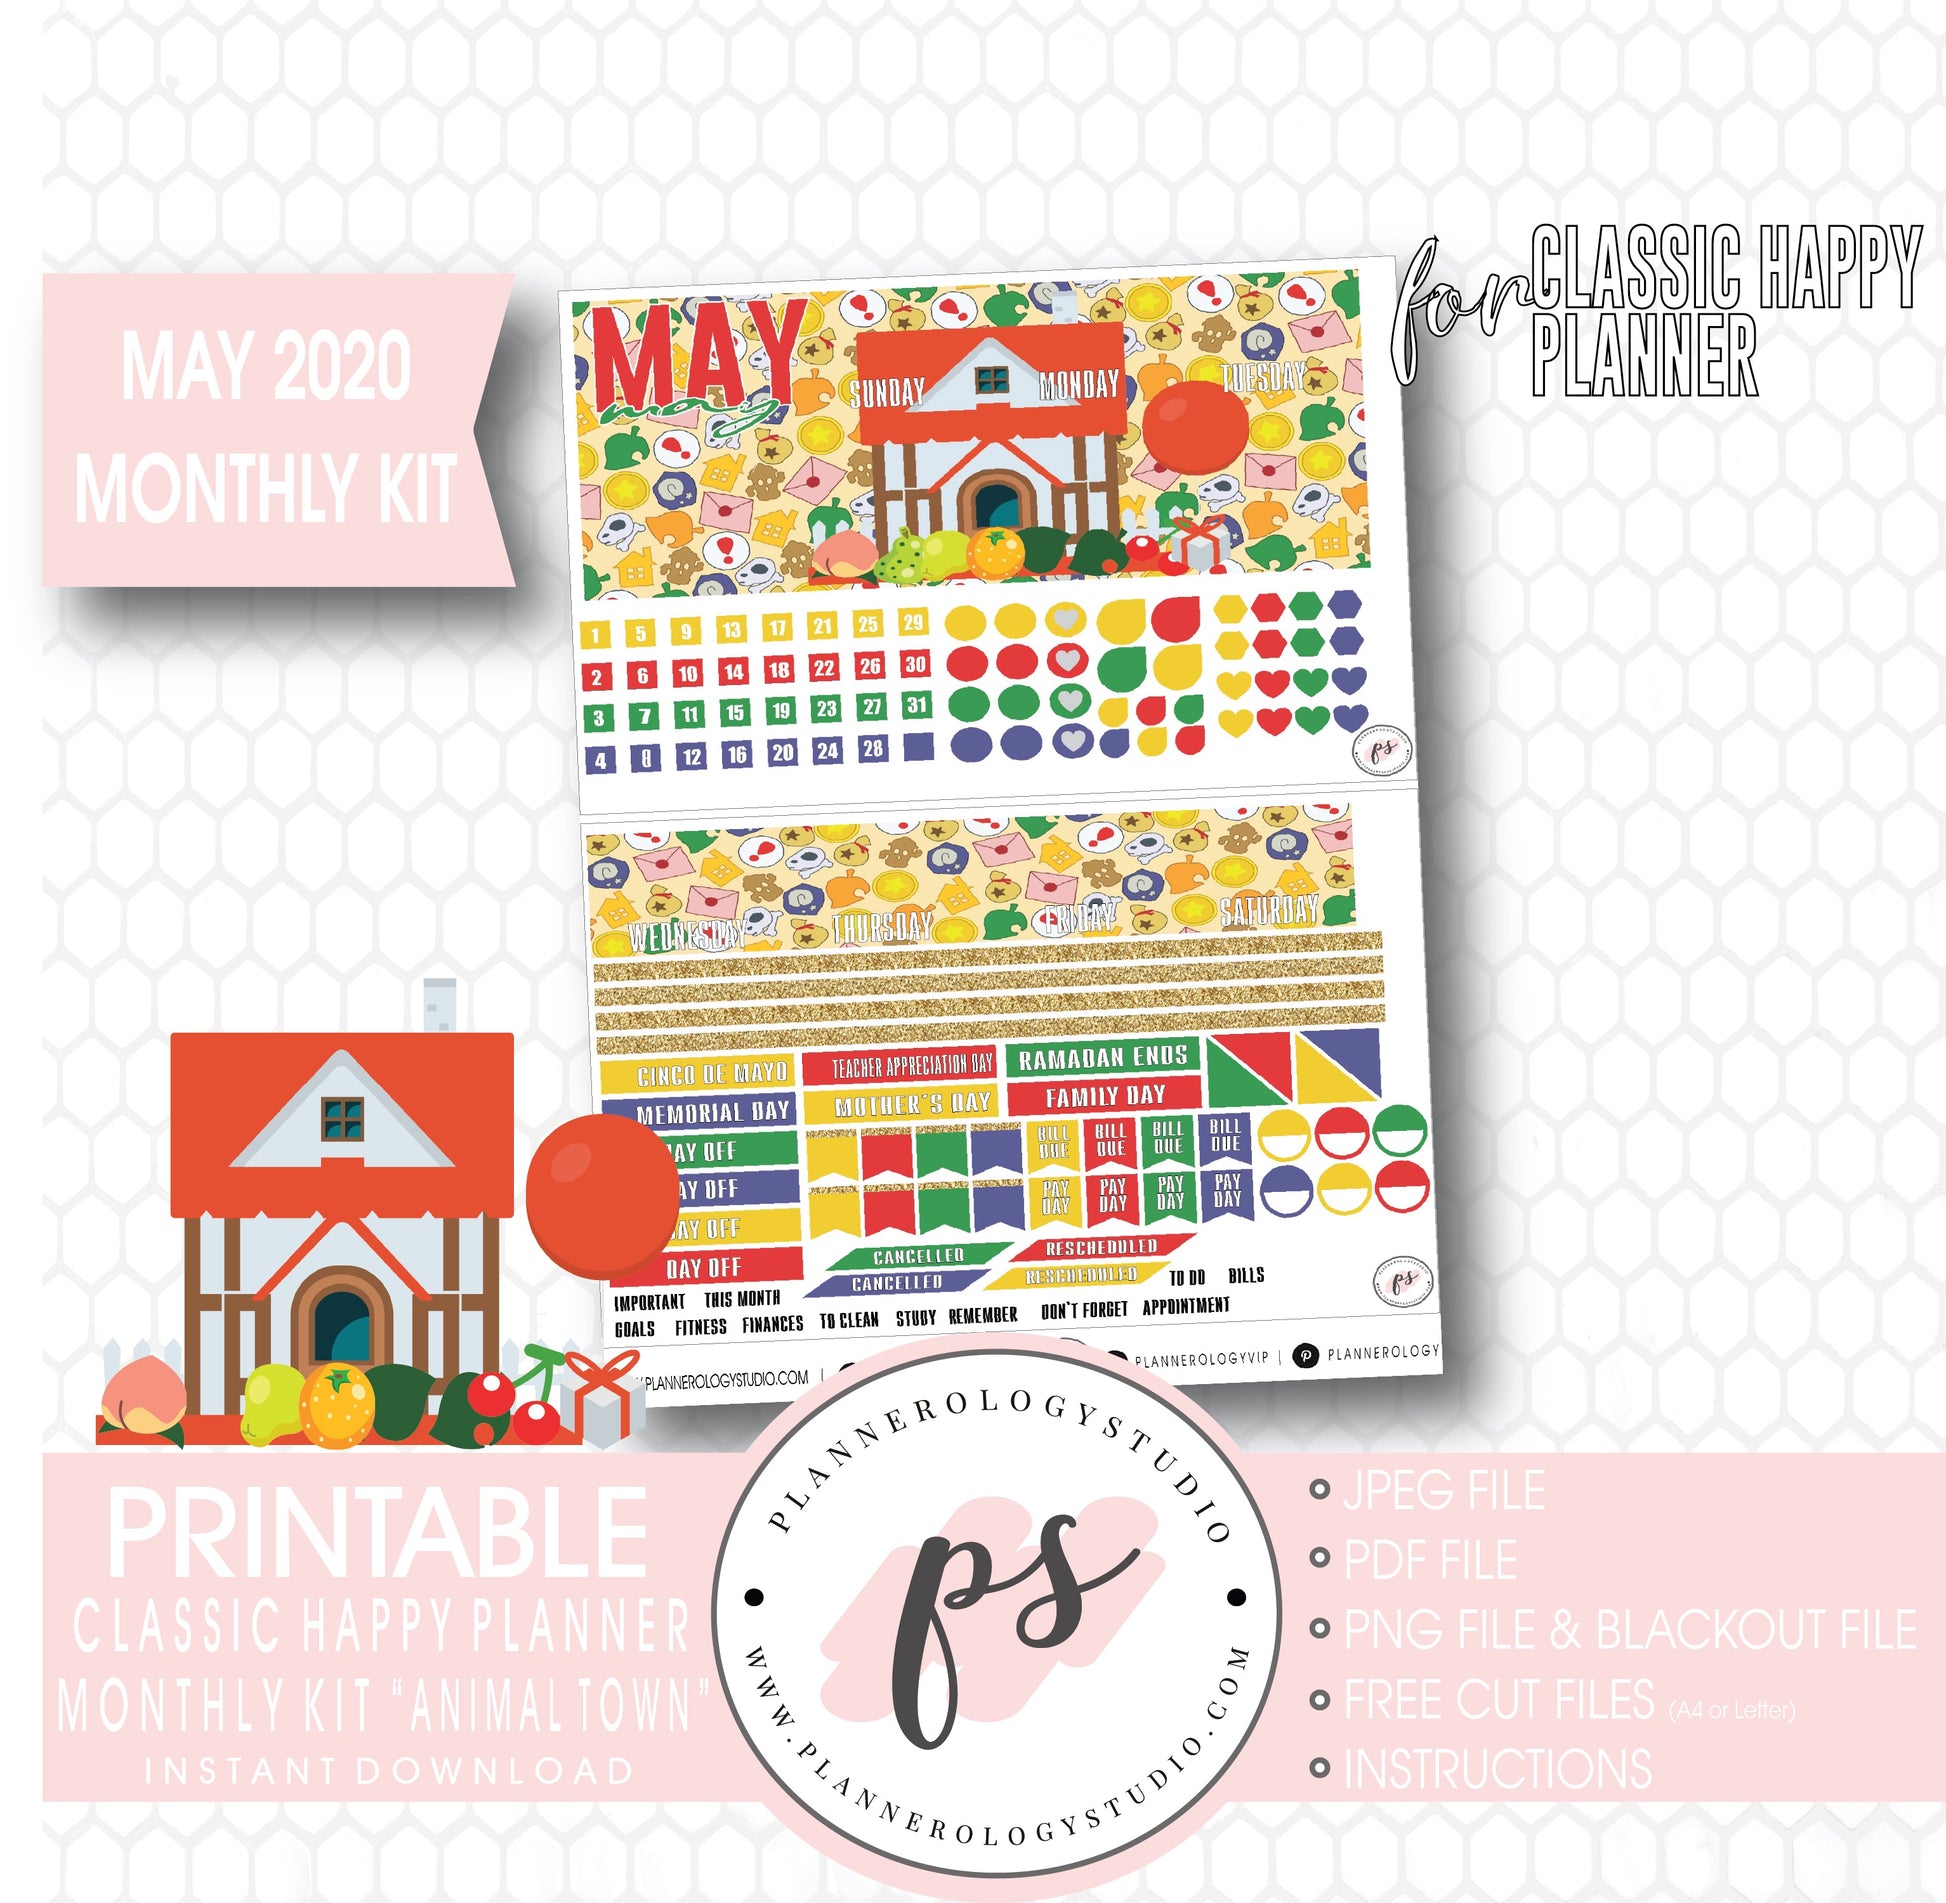 Animal Town (Animal Crossing Inspired) May 2020 Monthly View Kit Digital Printable Planner Stickers (for use with Classic Happy Planner) - Plannerologystudio